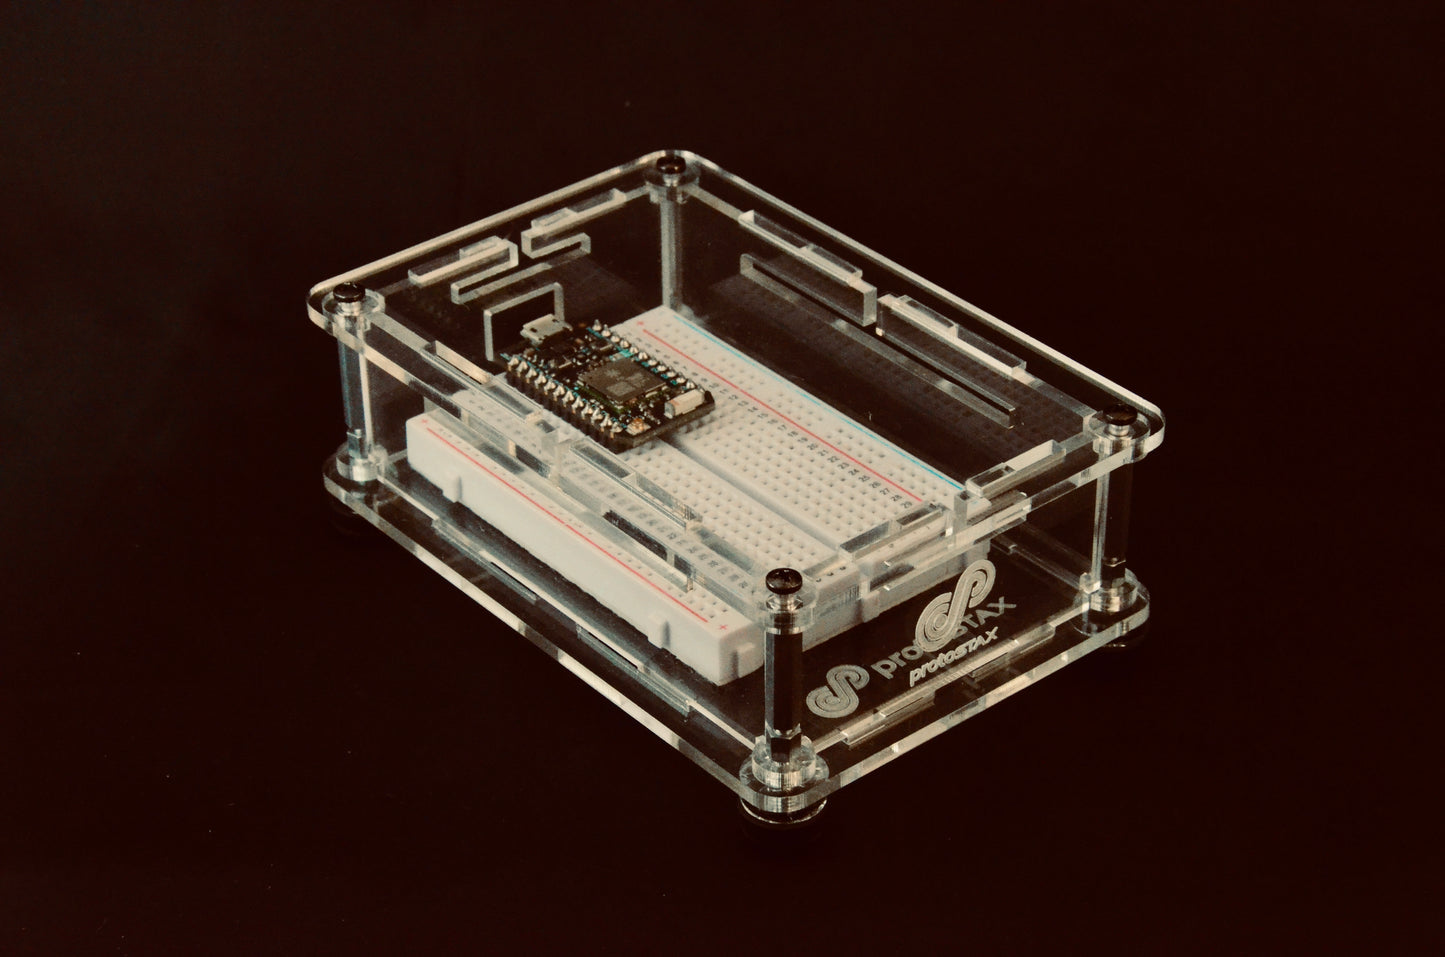 ProtoStax Enclosure for Breadboards/Custom - with Breadboard-friendly MCU (Particle Photon)